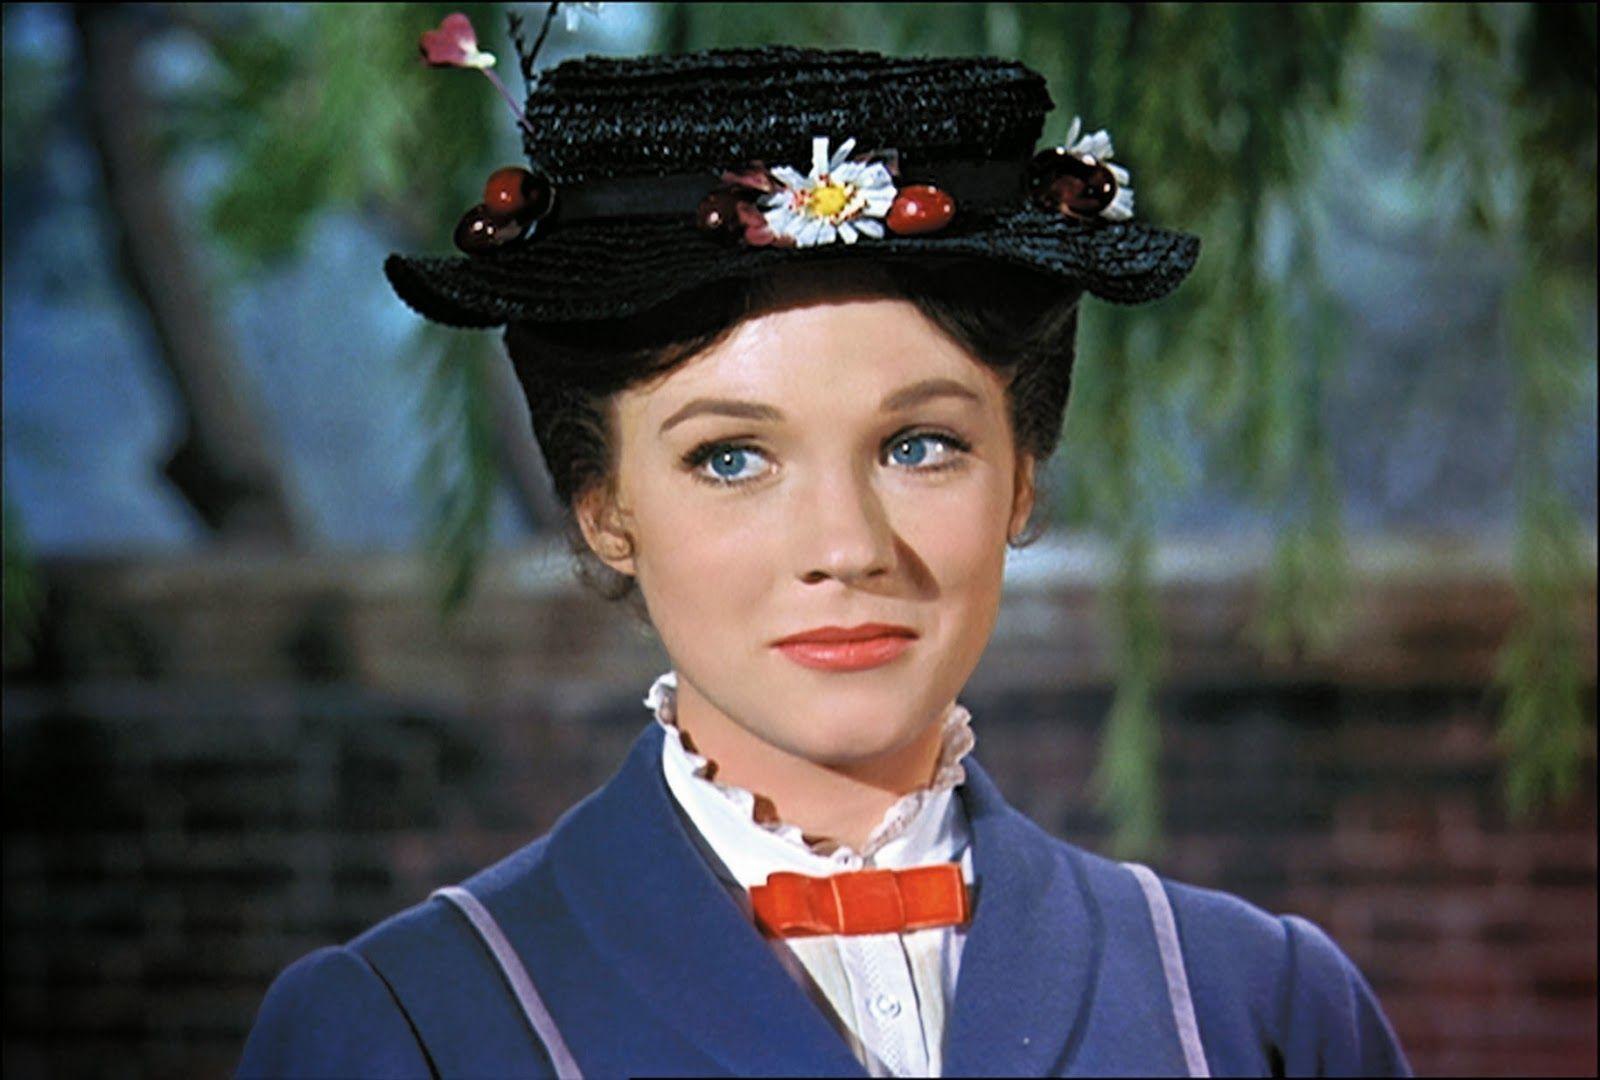 Mary Poppins Movie Julie Andrews Widescreen 2 HD Wallpaper. To try